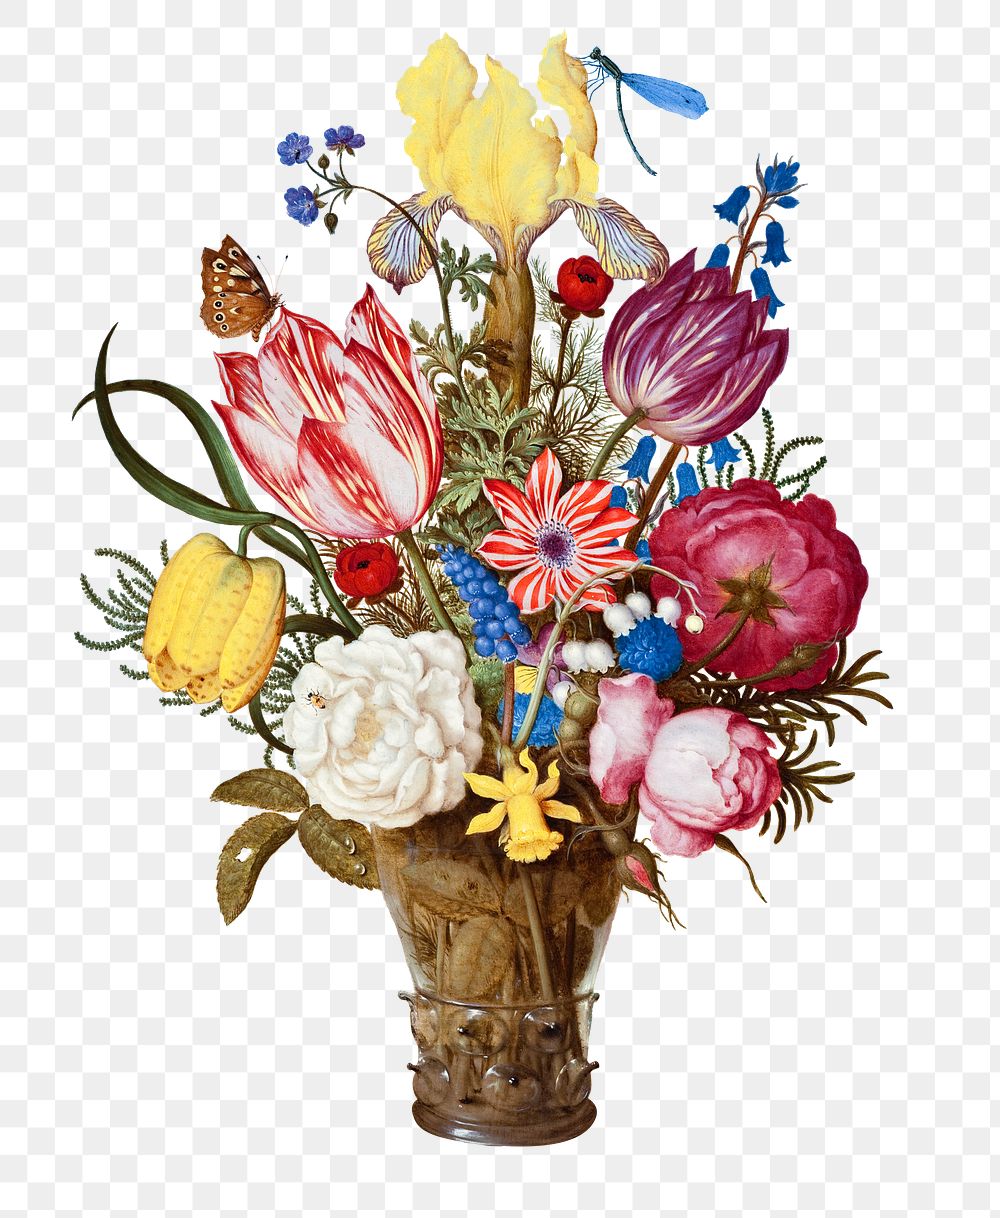 Png Bouquet of Flowers in a Glass Vase sticker, still life floral illustration, Ambrosius Bosschaert's artwork remastered by…